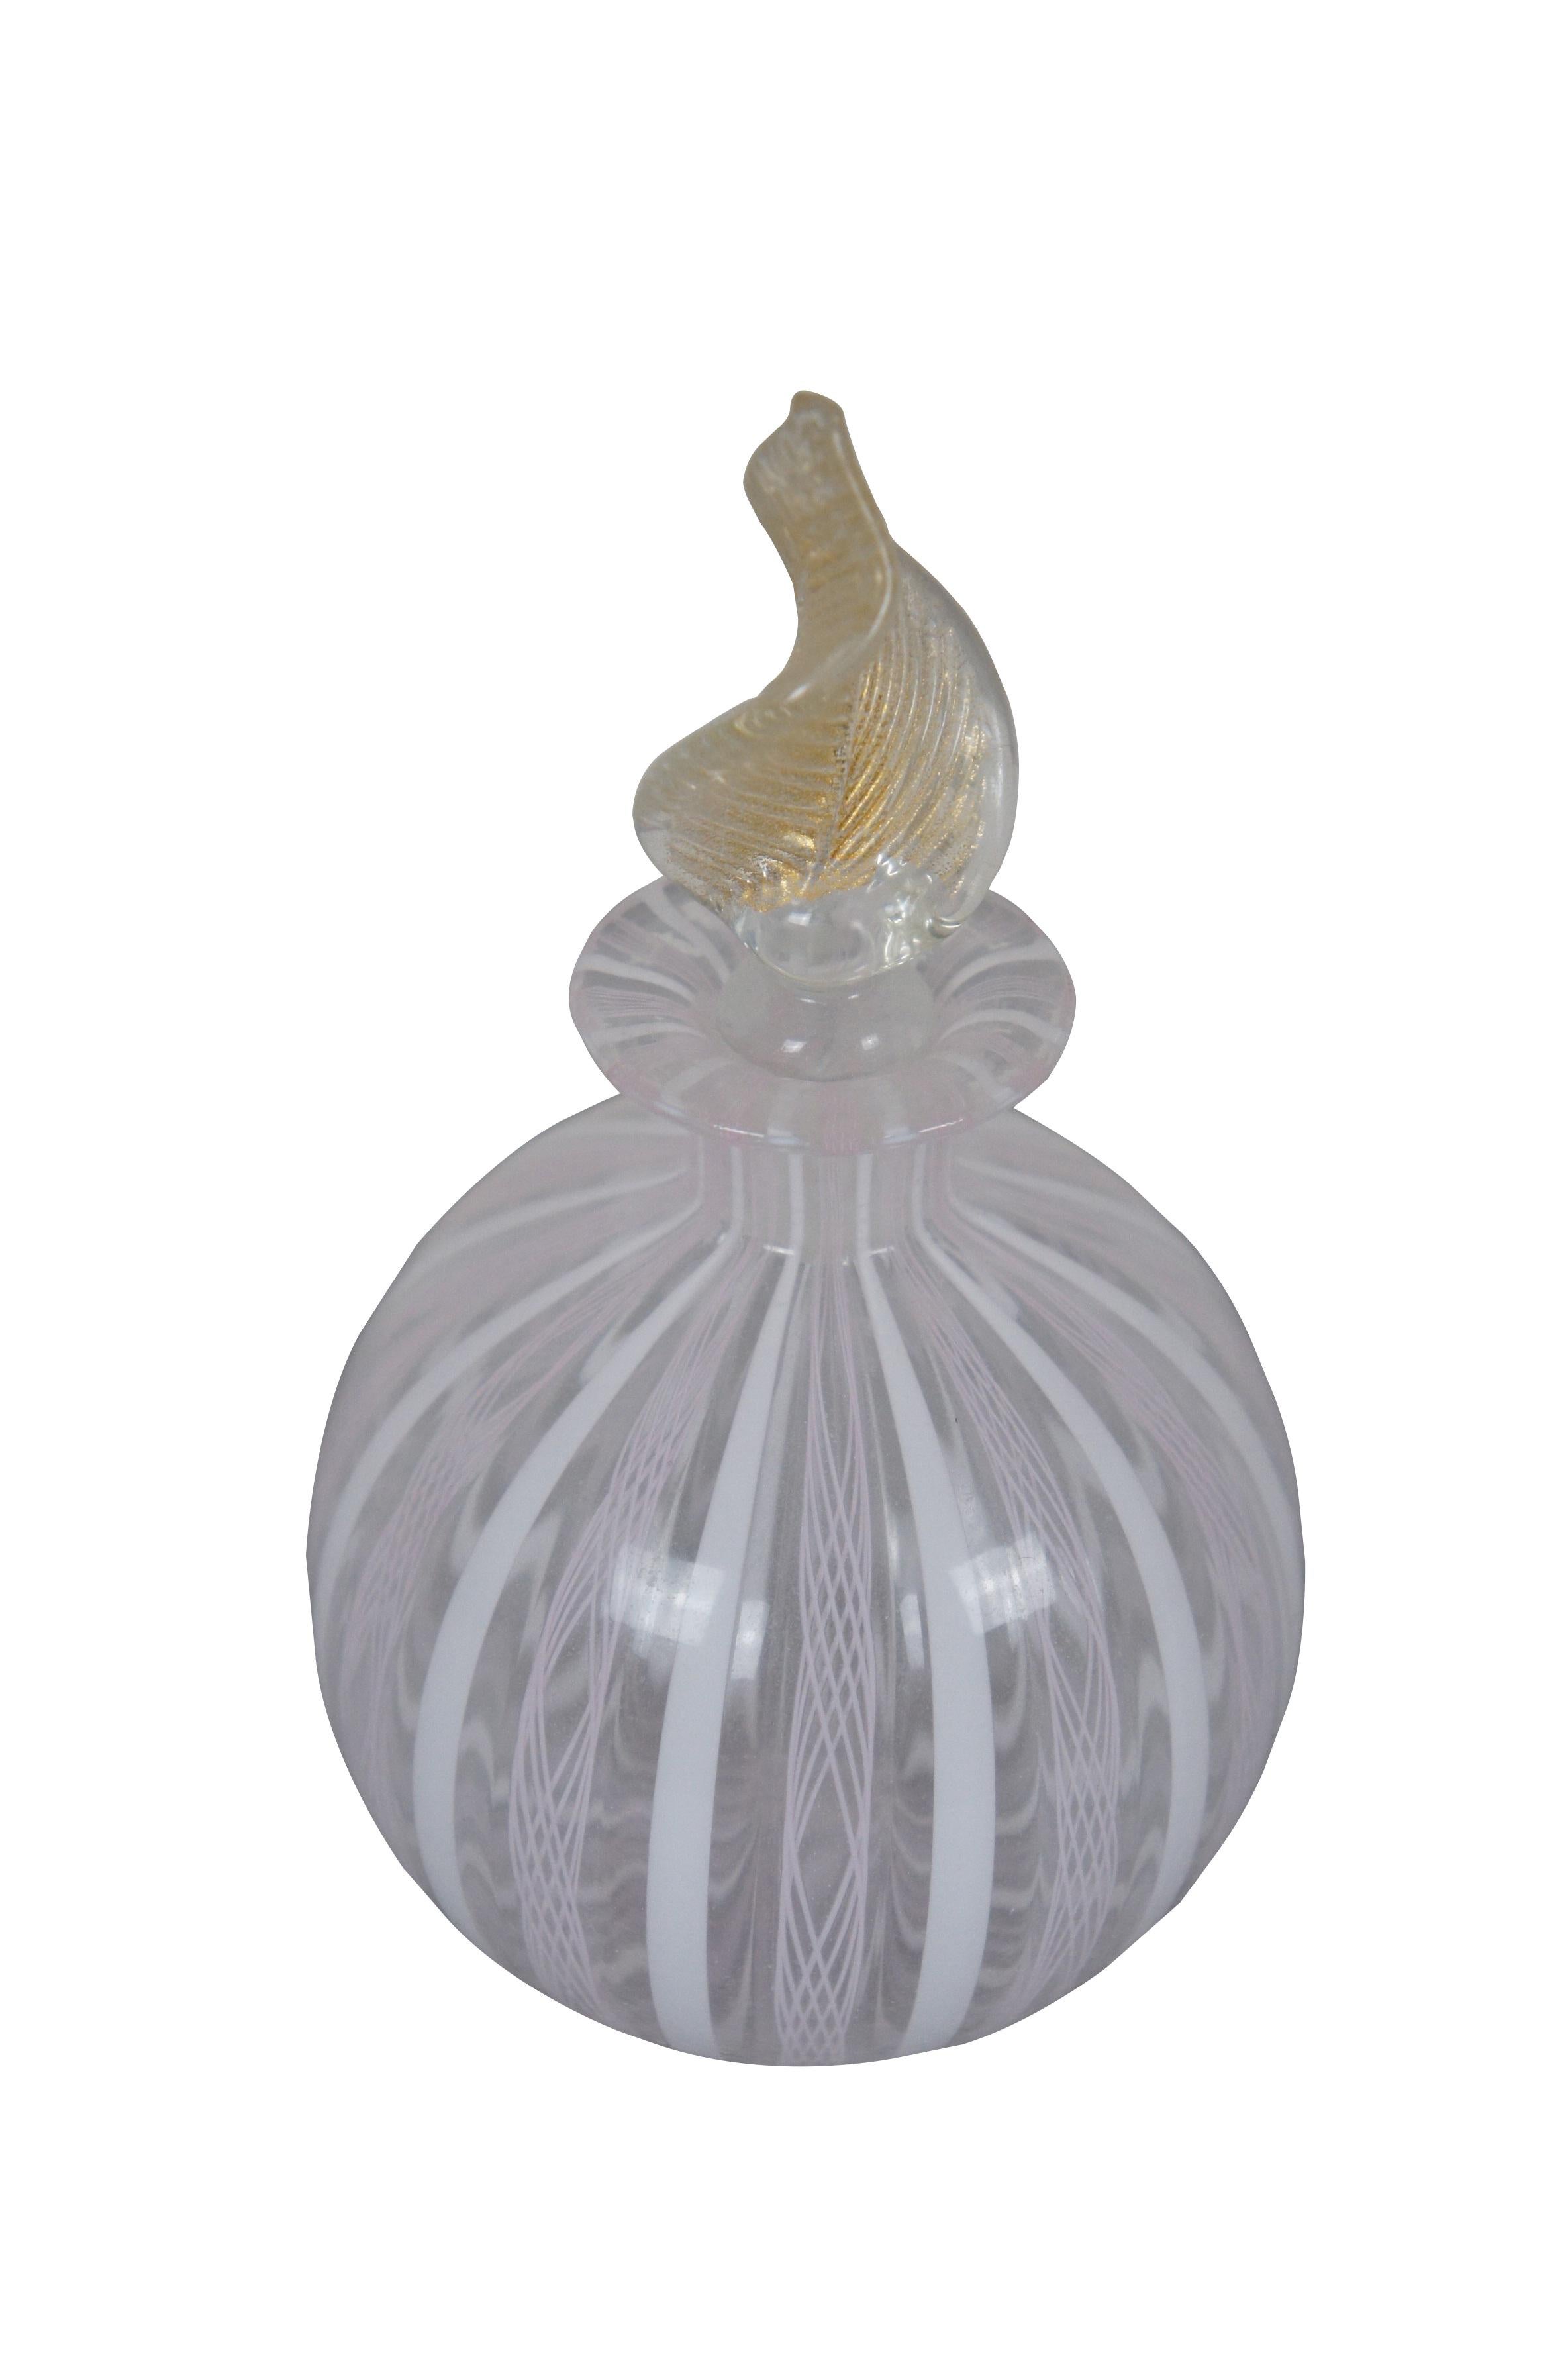 Mid 20th century Murano hand blown art glass perfume bottle featuring a round form decorated with vertical pink and white latticino stripes and a gold flecked leaf shaped stopper. 

Dimensions:
3.25